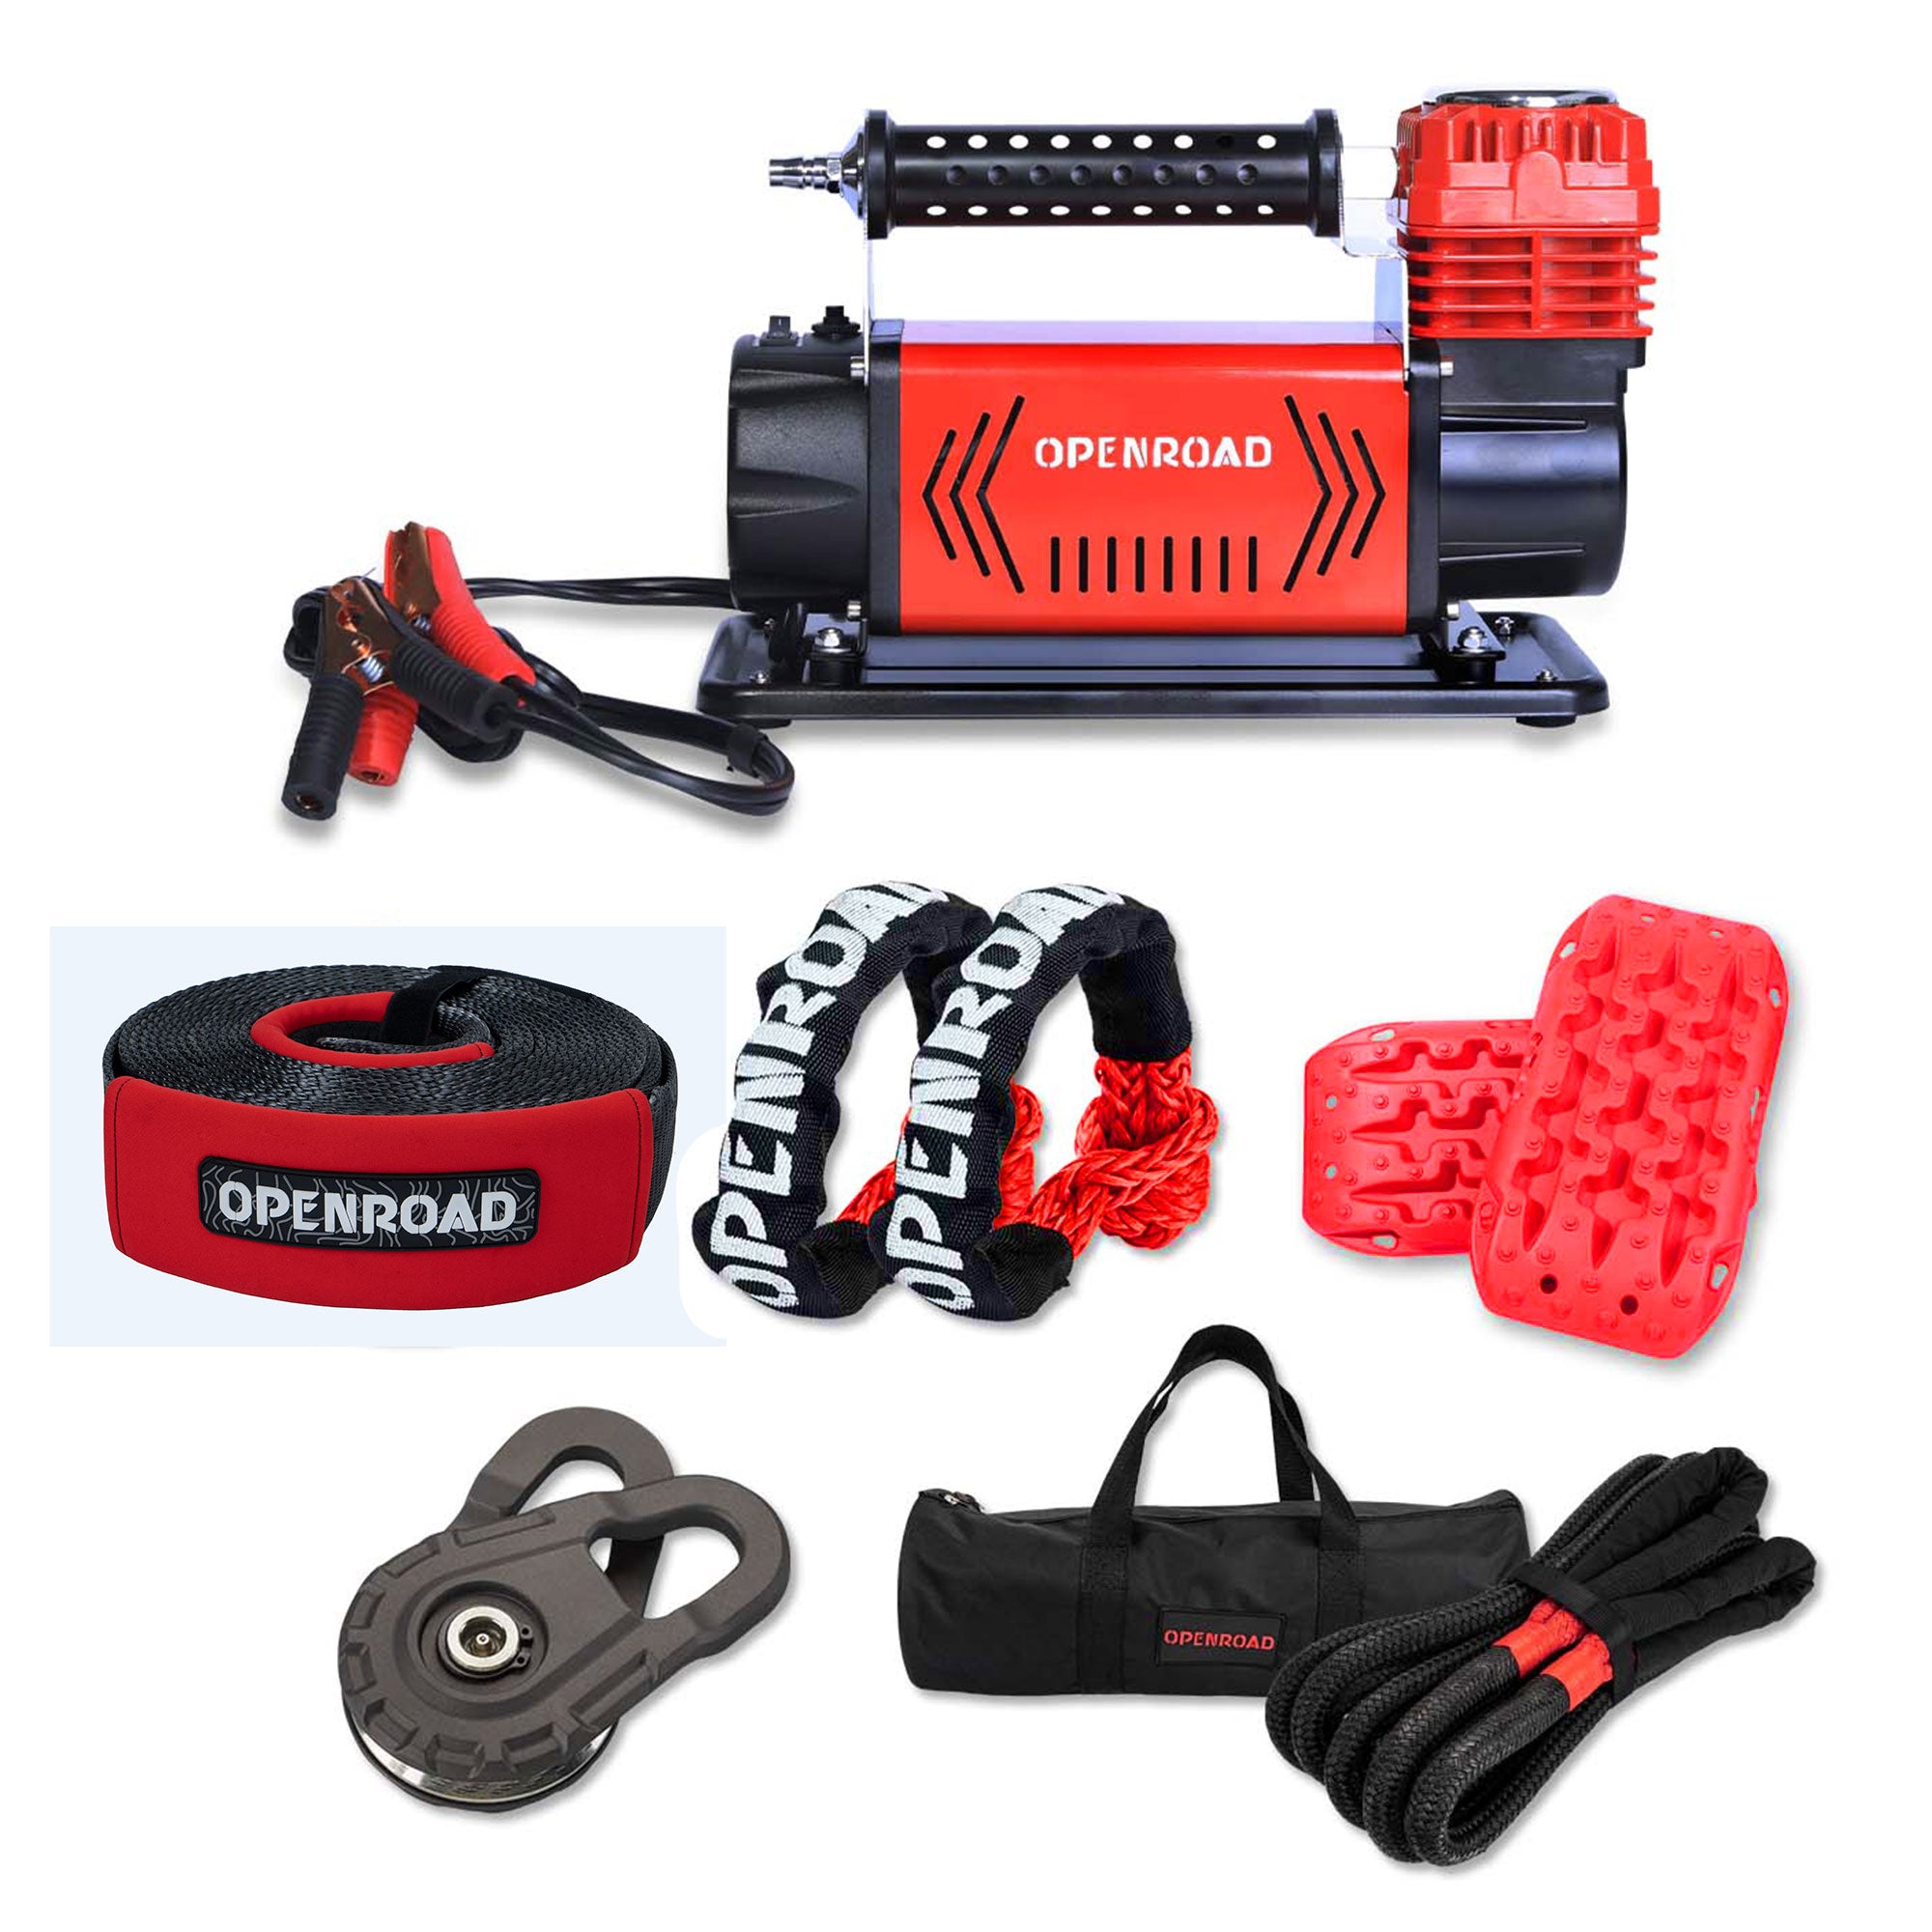 5.65 CFM air compressor + Heavy Duty Tow Strap3''x30' (35,000 lbs)+soft shackle(2pcs)+Traction Boards+Winch Pulley+Recovery Tow Rope  openroad4wd.com   